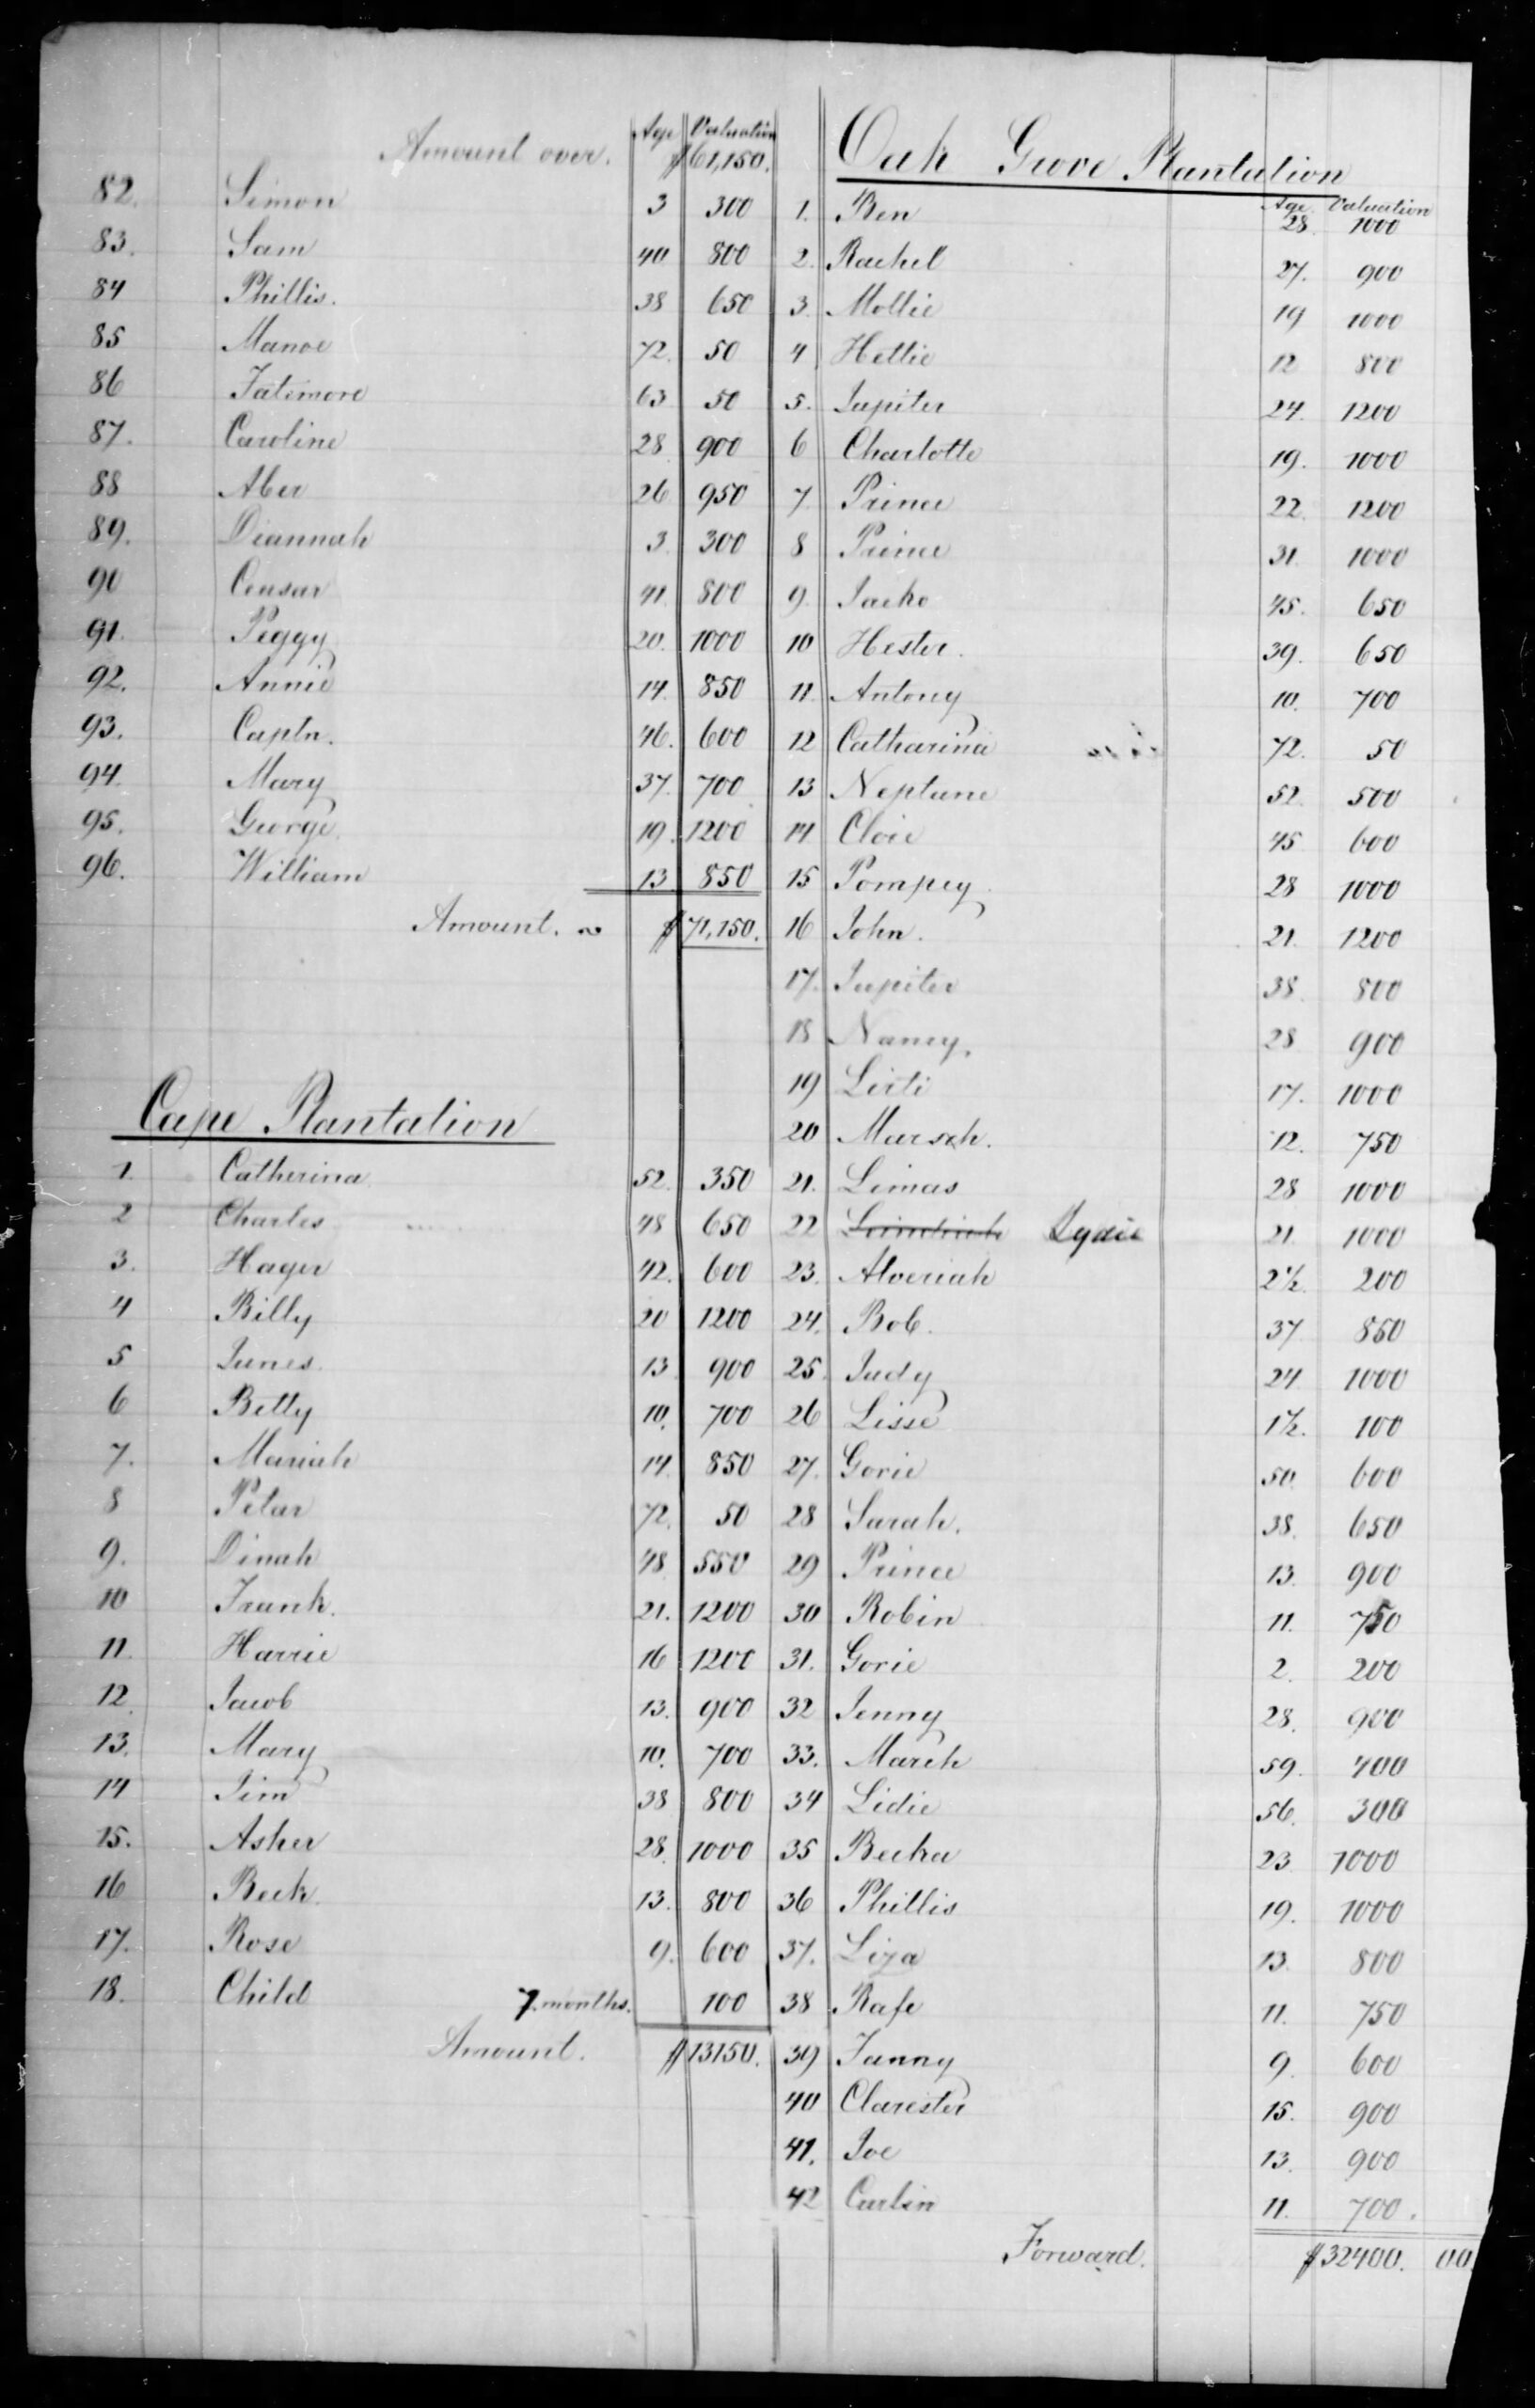 List of Enslaved People on Arthur Blake's Santee River Plantations, Confederate Citizens File